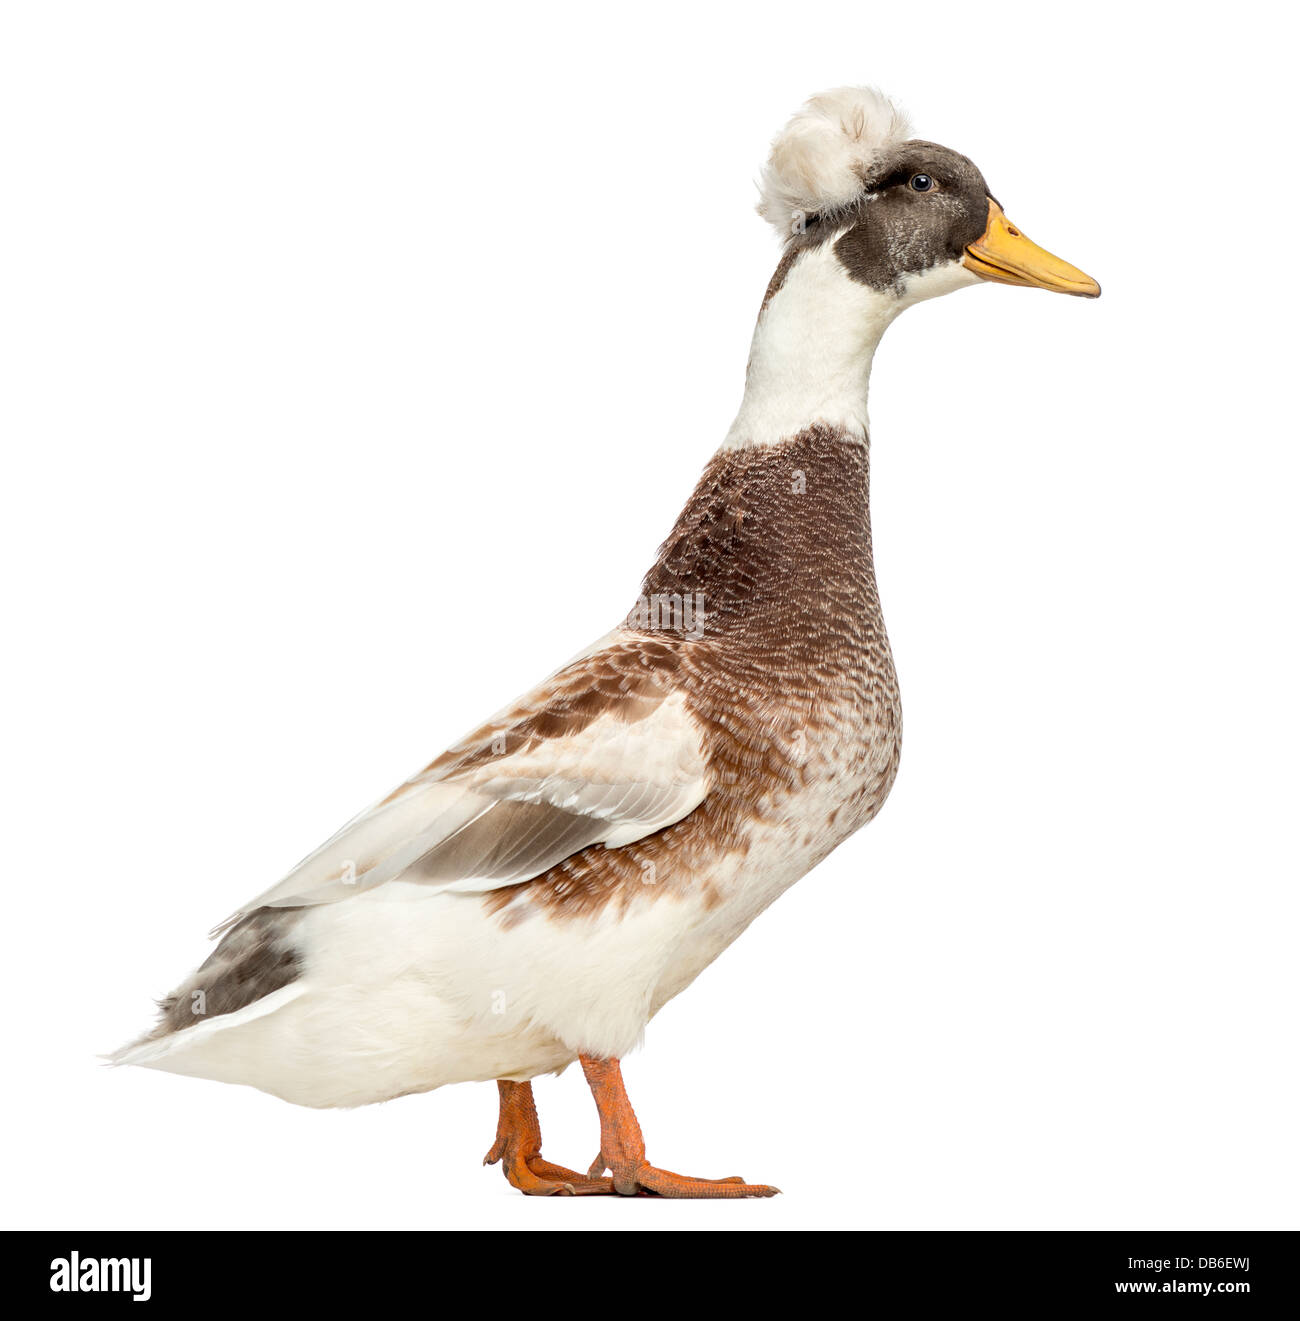 Male Crested Duck, lophonetta specularioides, against white background Stock Photo